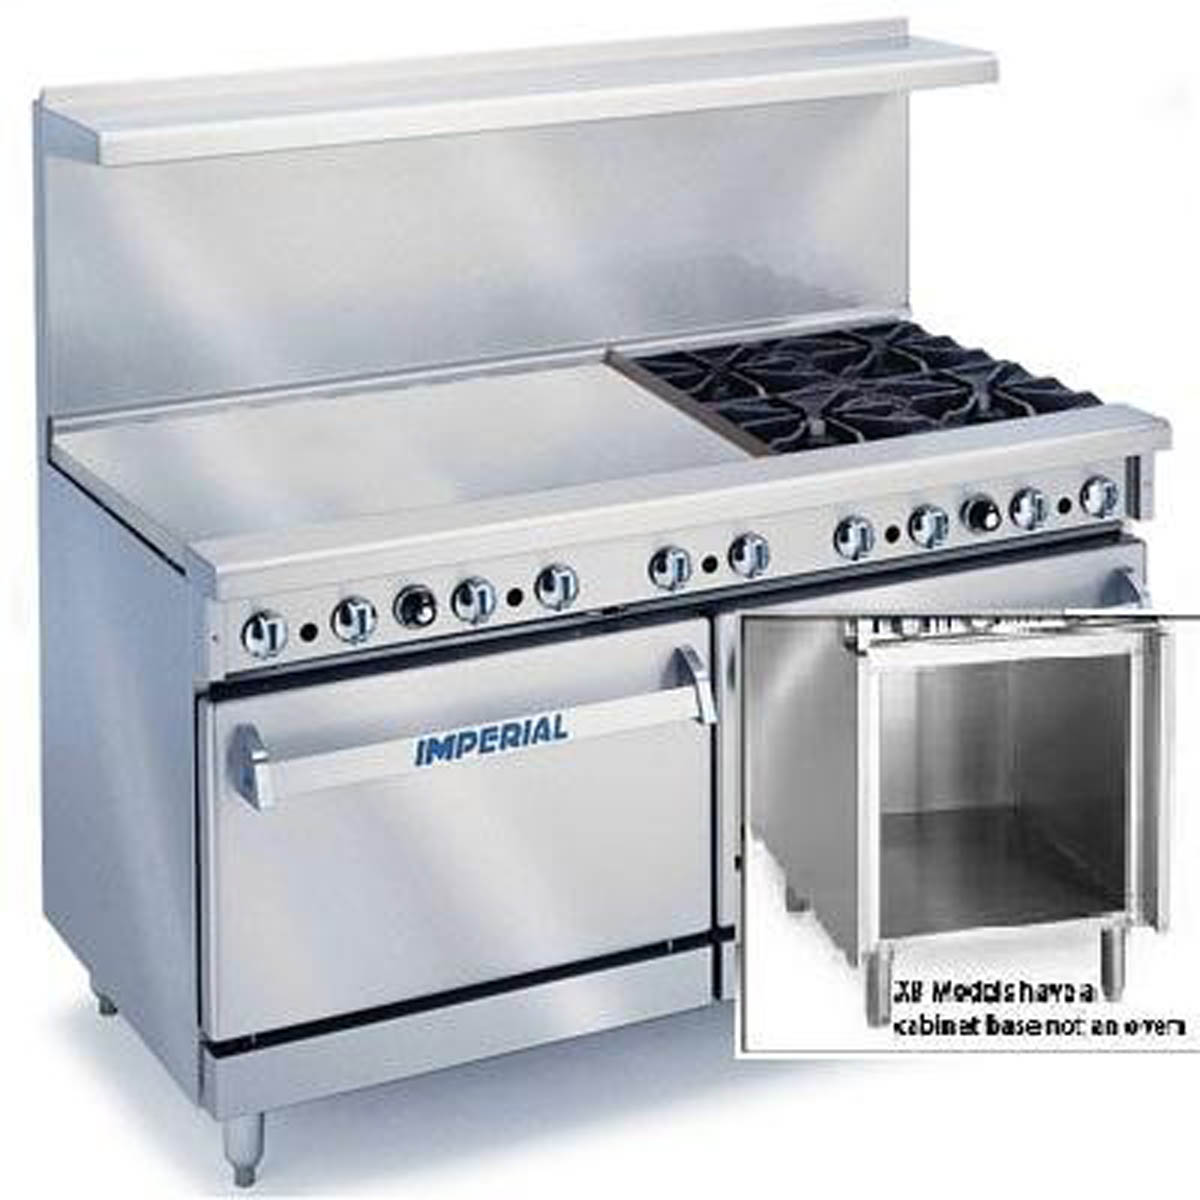 Imperial IR-4-RG36-C-XB 60“ Gas Restaurant Range w/ 4 Open Burners, 36“ Griddle/Broiler, Convection Oven, Open Cabinet